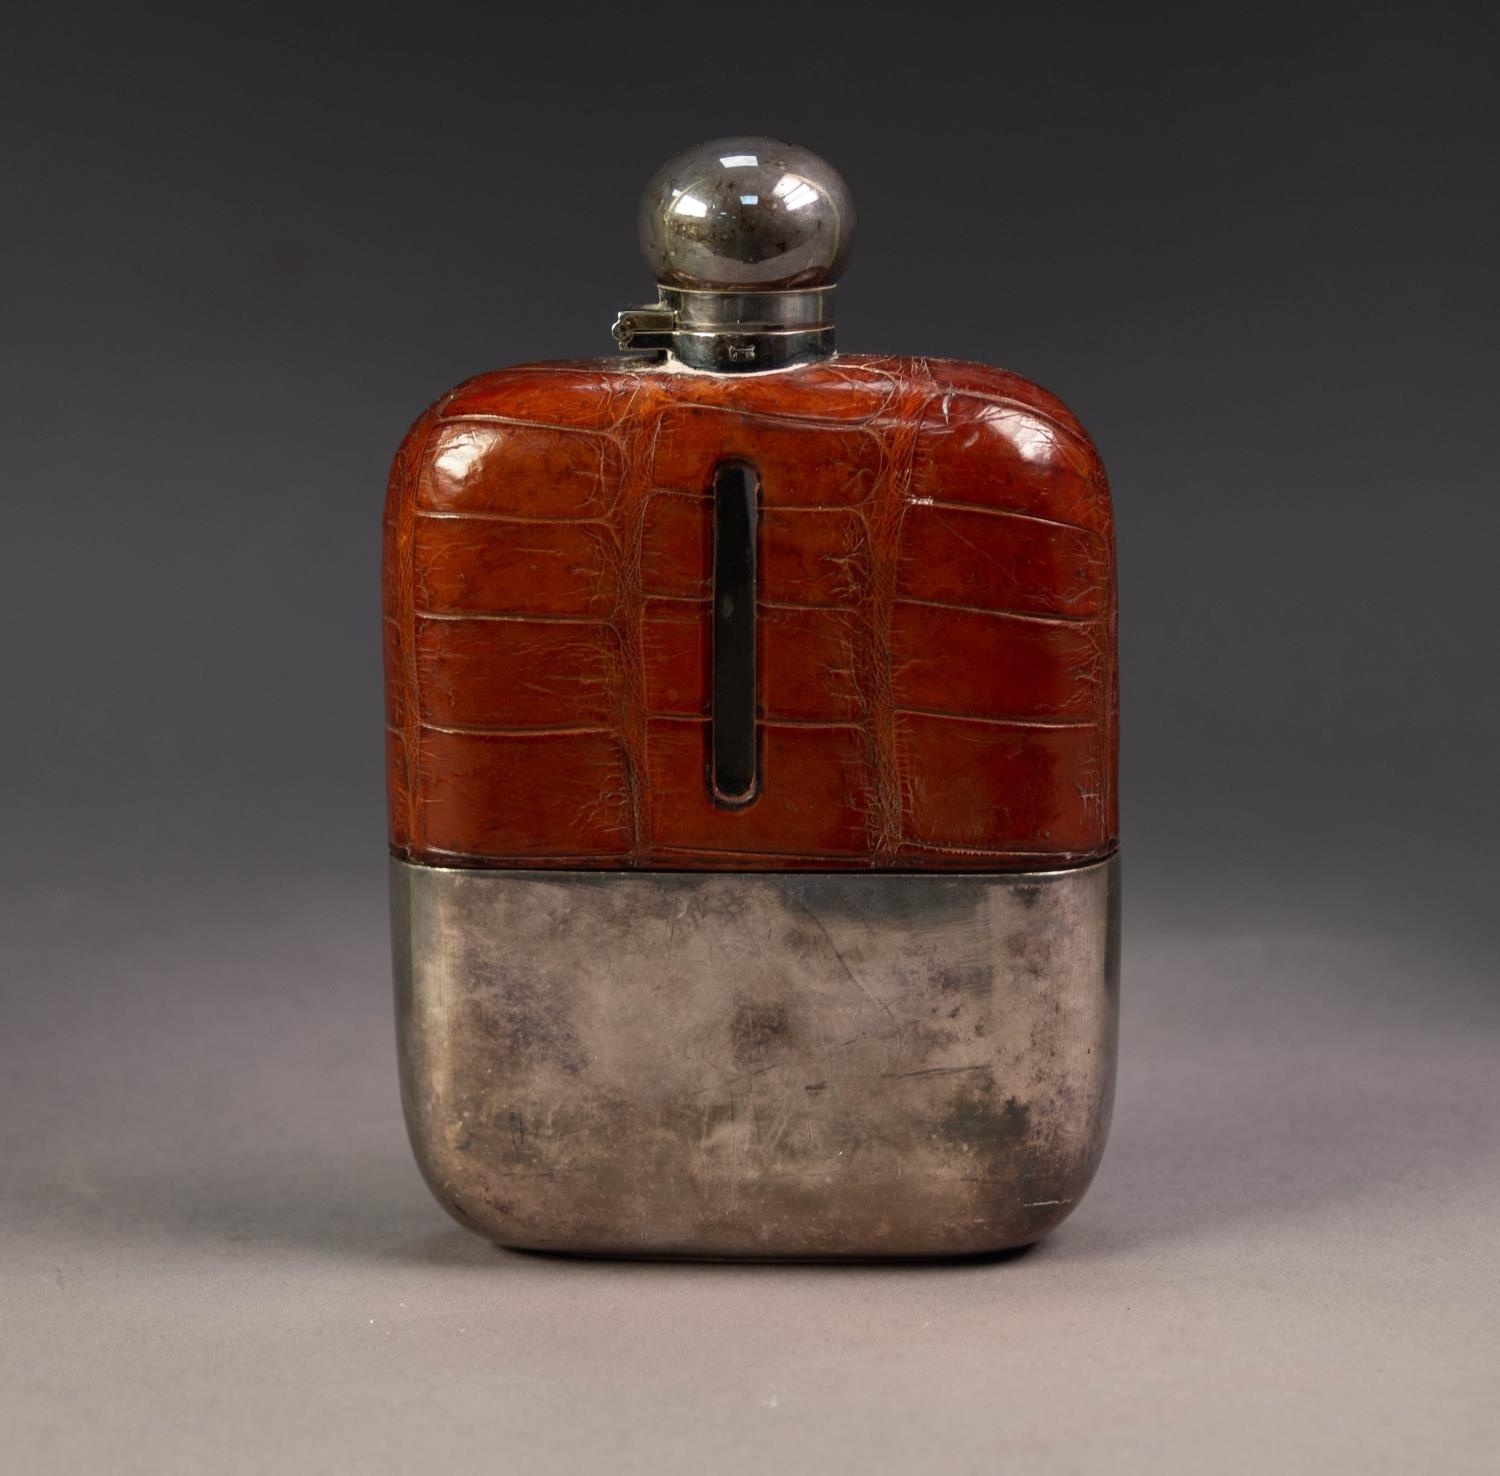 GOOD CROCODILE SKIN CLAD LARGE, 5/8 PINT GLASS HIP FLASK WITH PULL-OFF ELECTROPLATED BASE BY JAMES